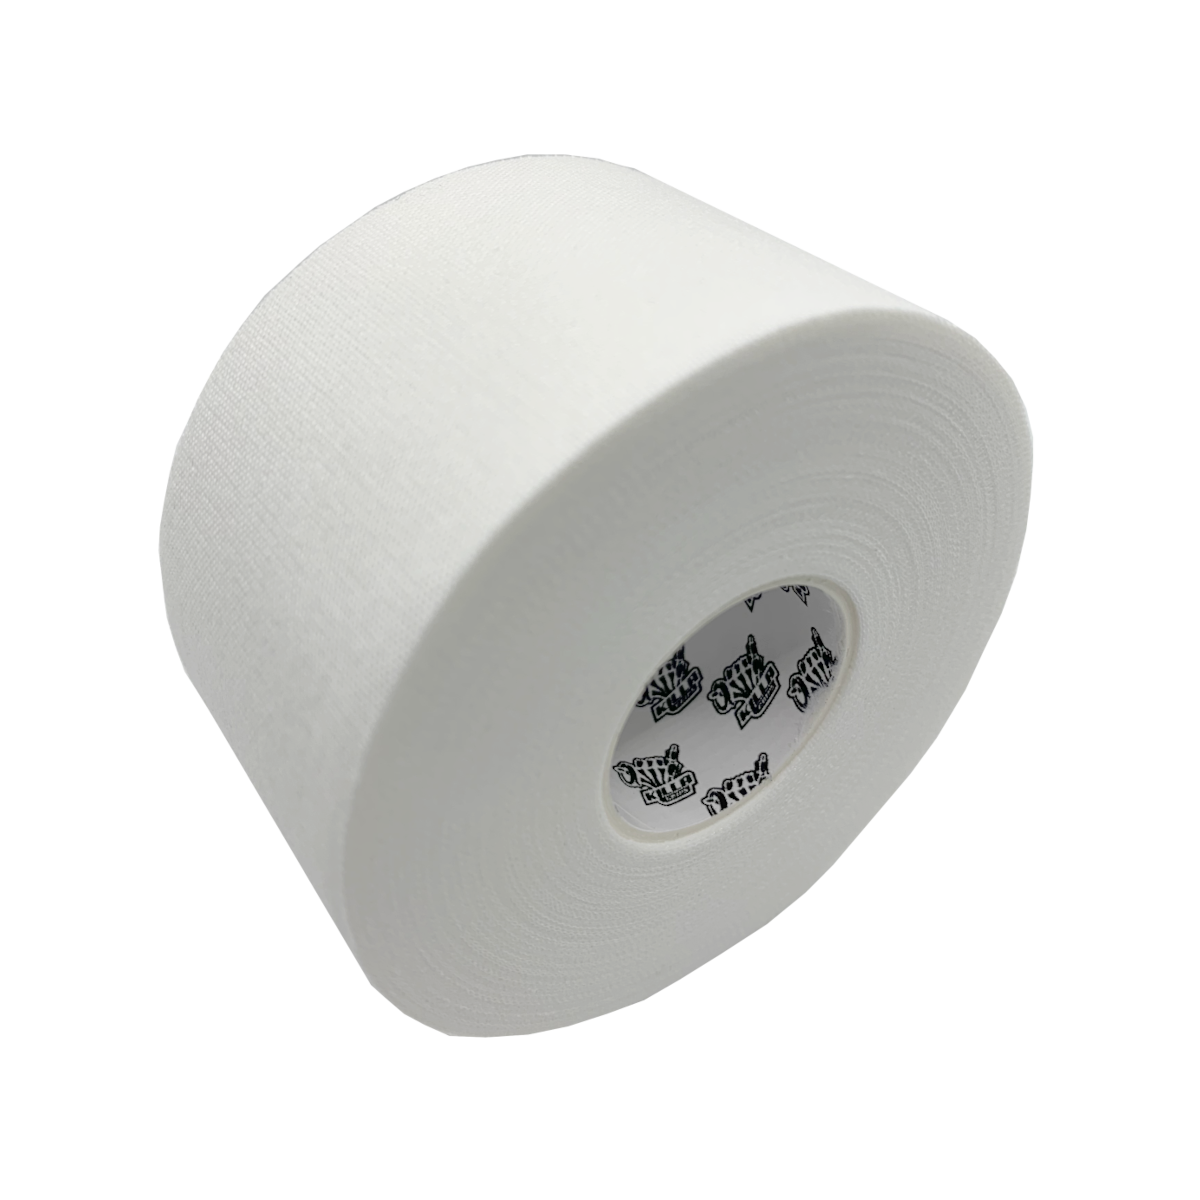 KillaGrips Athletic Tape Roll (1.5 Inch) - Top Performance Tape